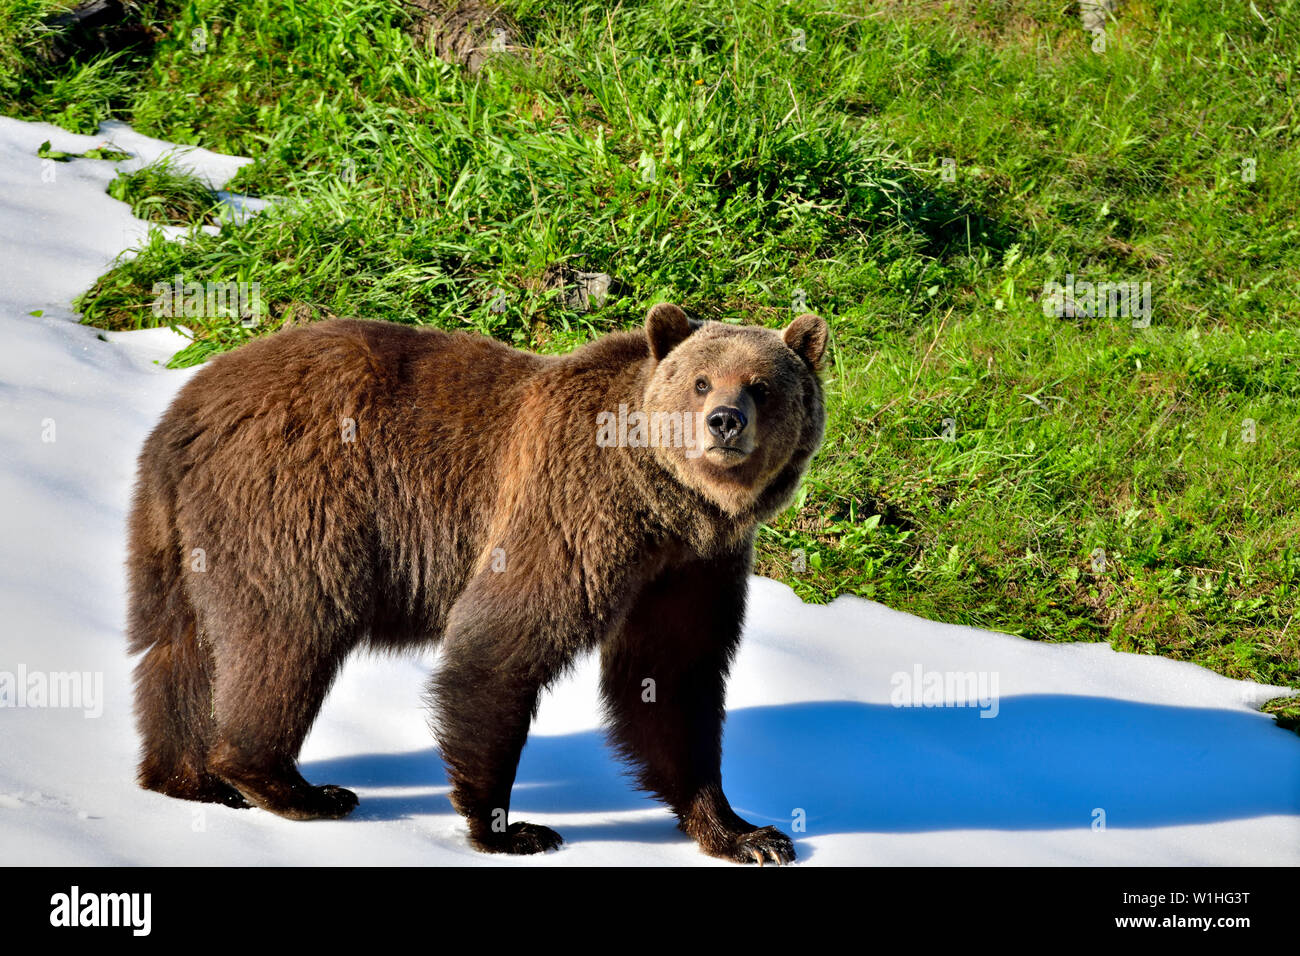 A close up side view of an adult grizzly bear 'Ursus arctos' walking on a snow patch along a  grassy hillside in rural Alberta Canada Stock Photo